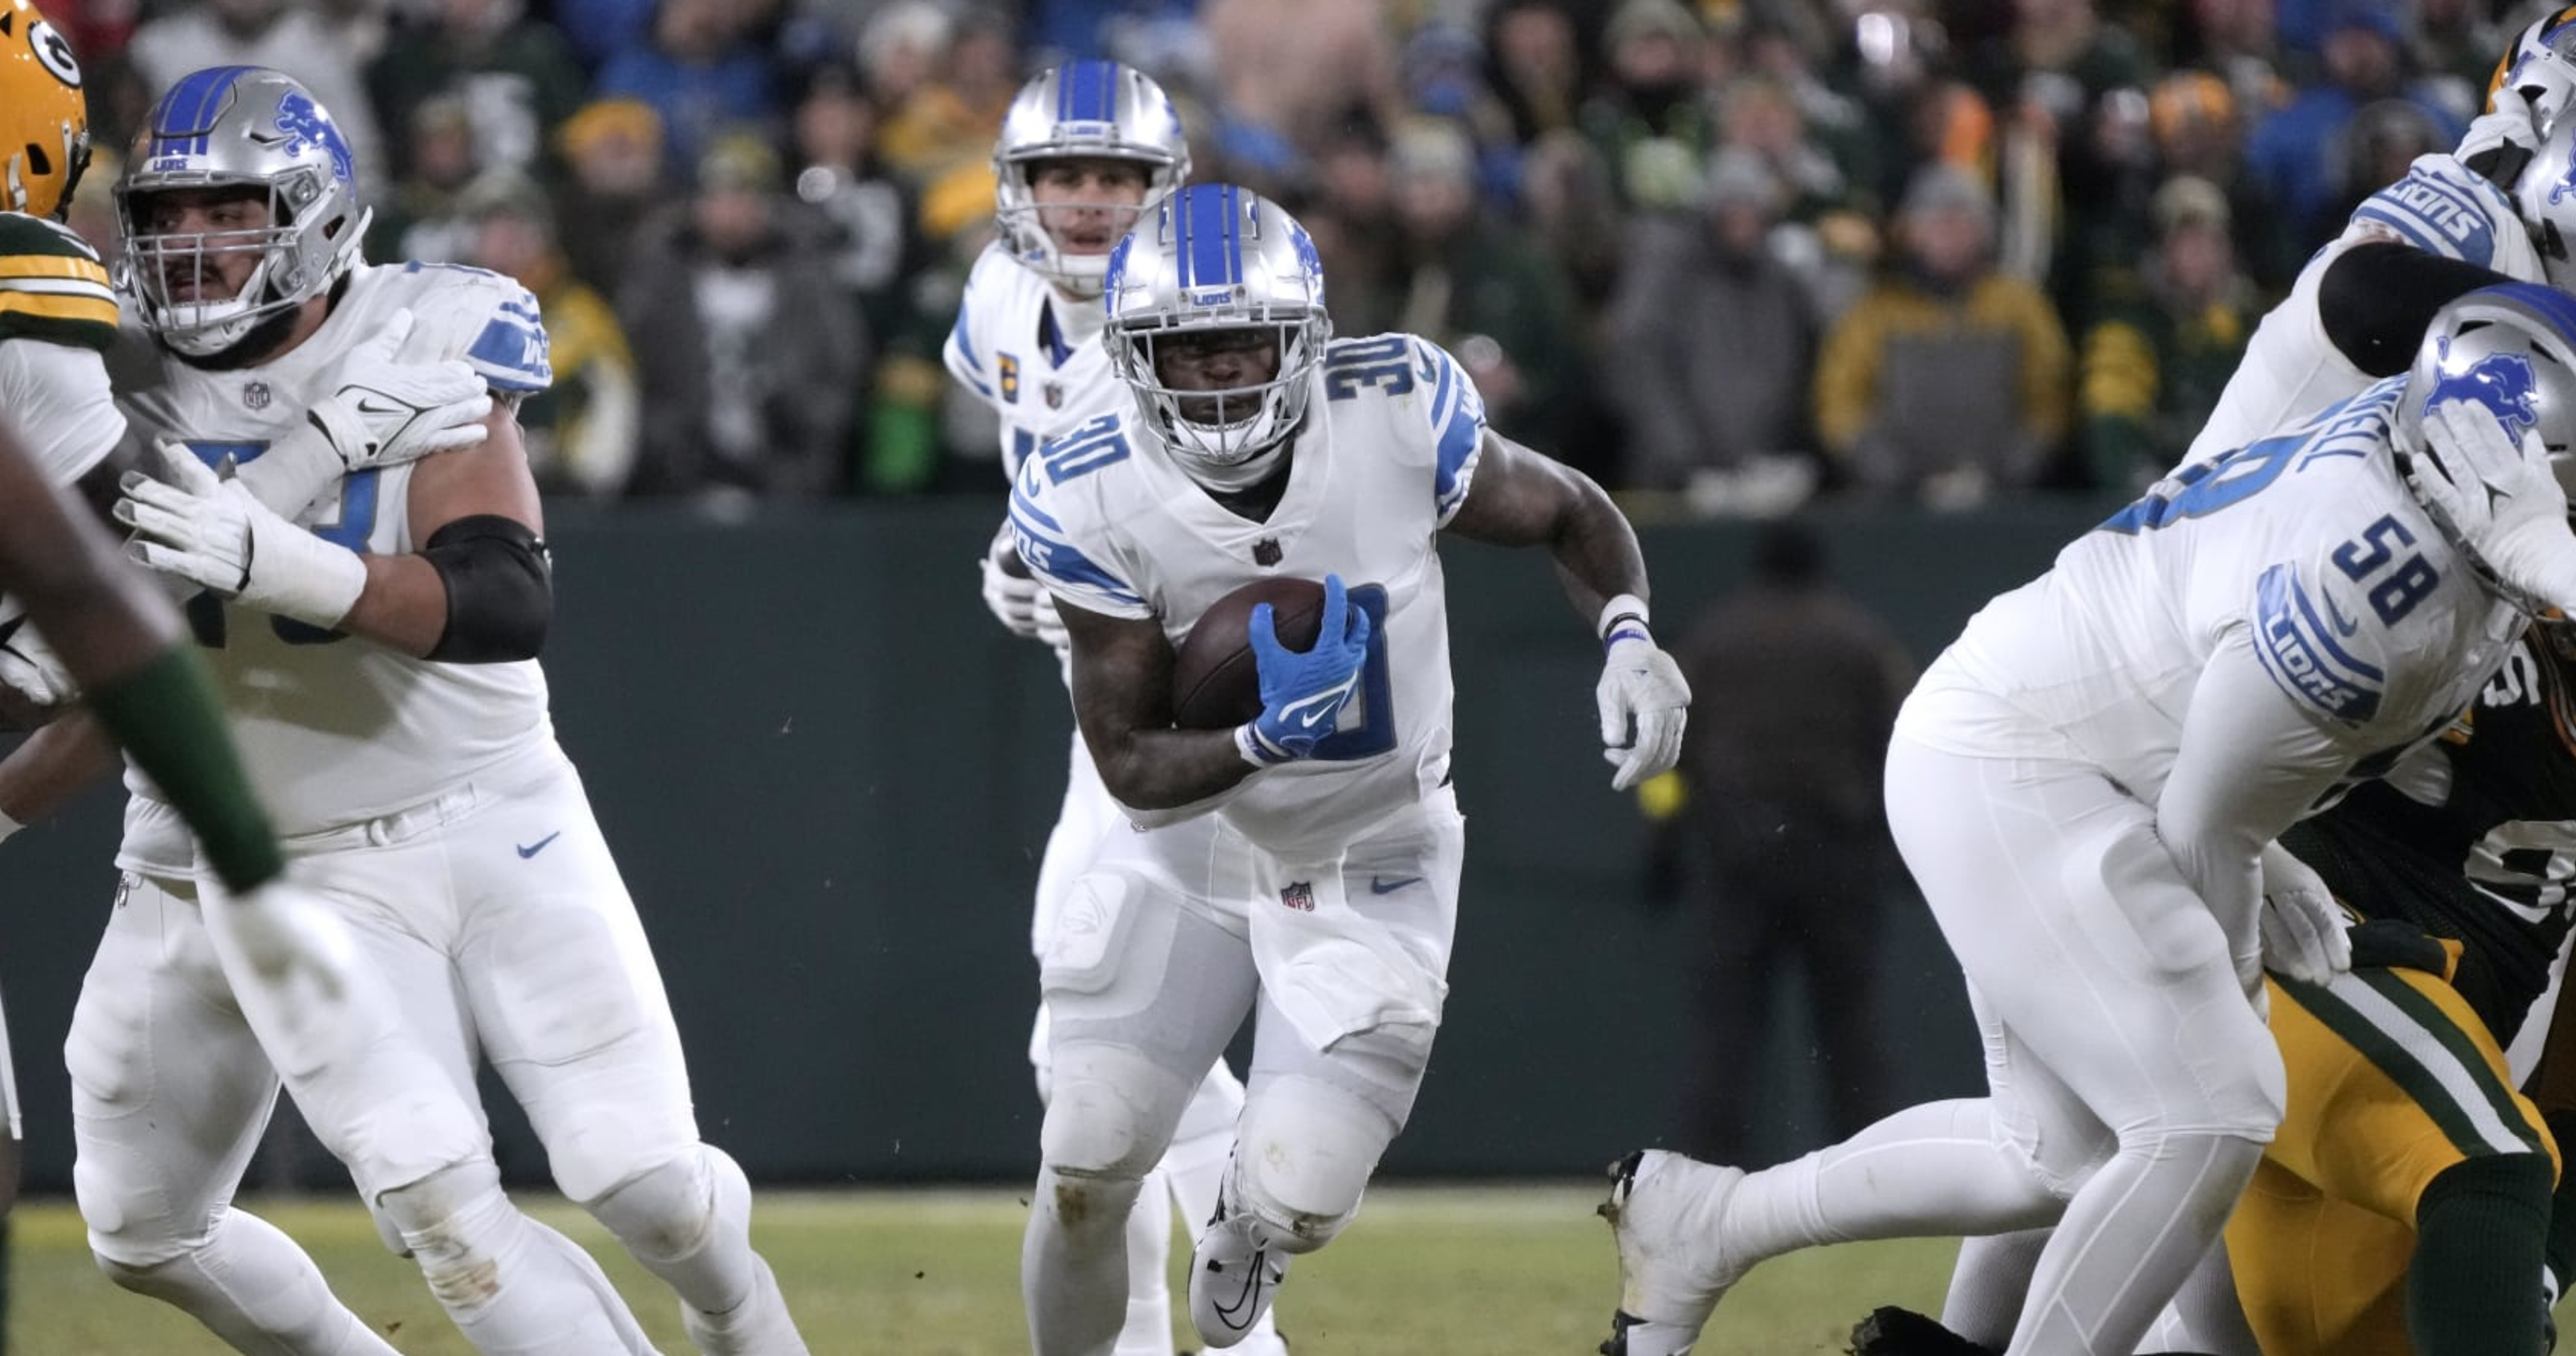 Detroit Lions' Future Blindingly Bright After Turnaround Season Punctuated by SN..